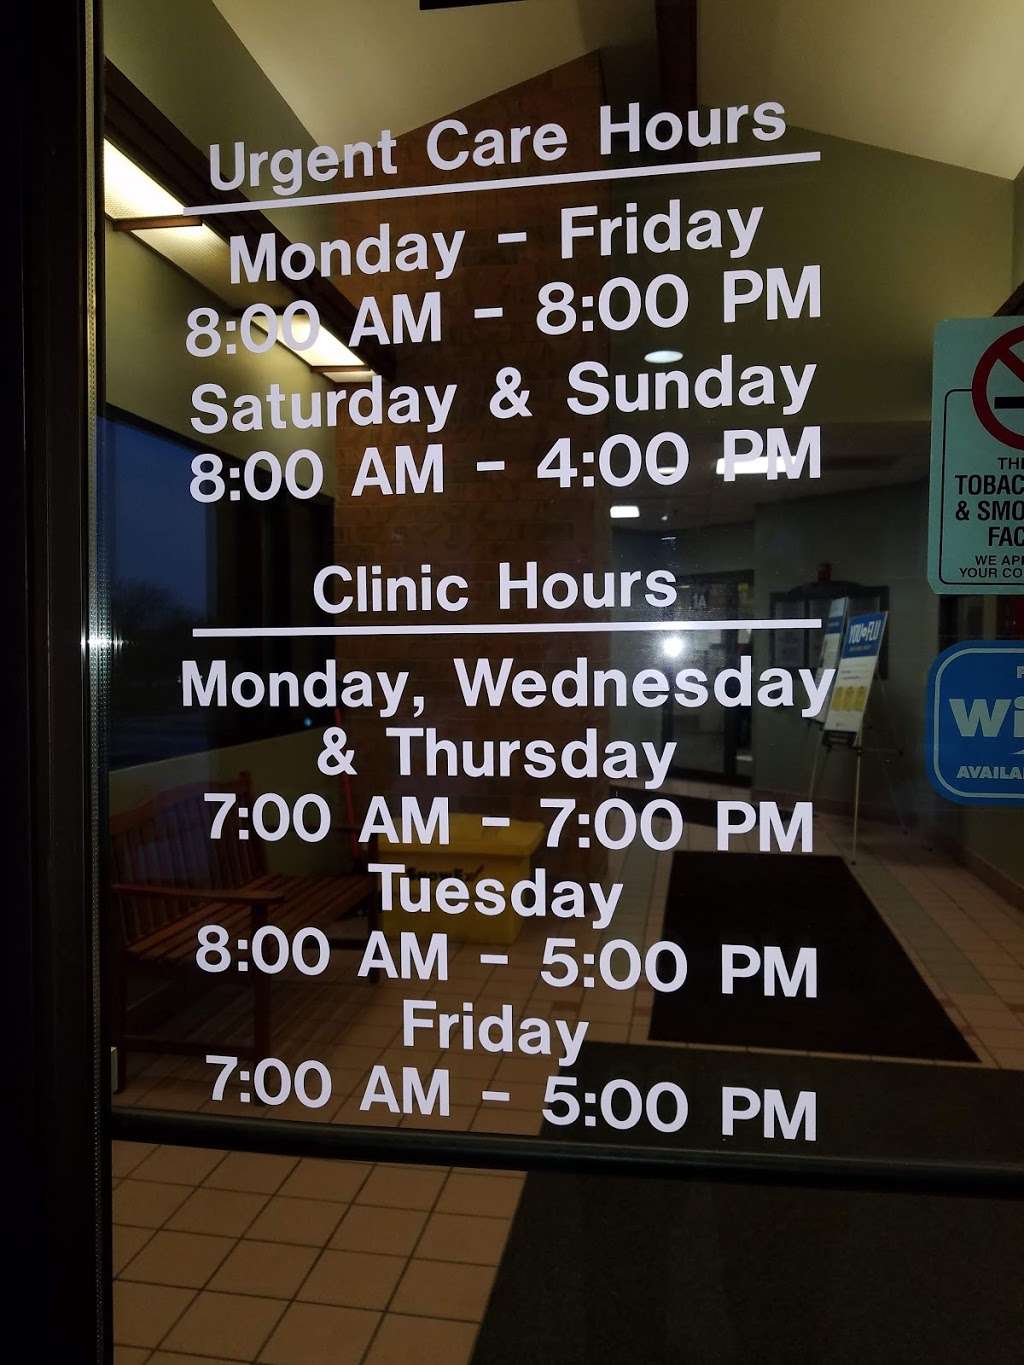 ProHealth Medical Group Clinic & Urgent Care New Berlin | 13900 W National Ave, New Berlin, WI 53151 | Phone: (262) 928-4500